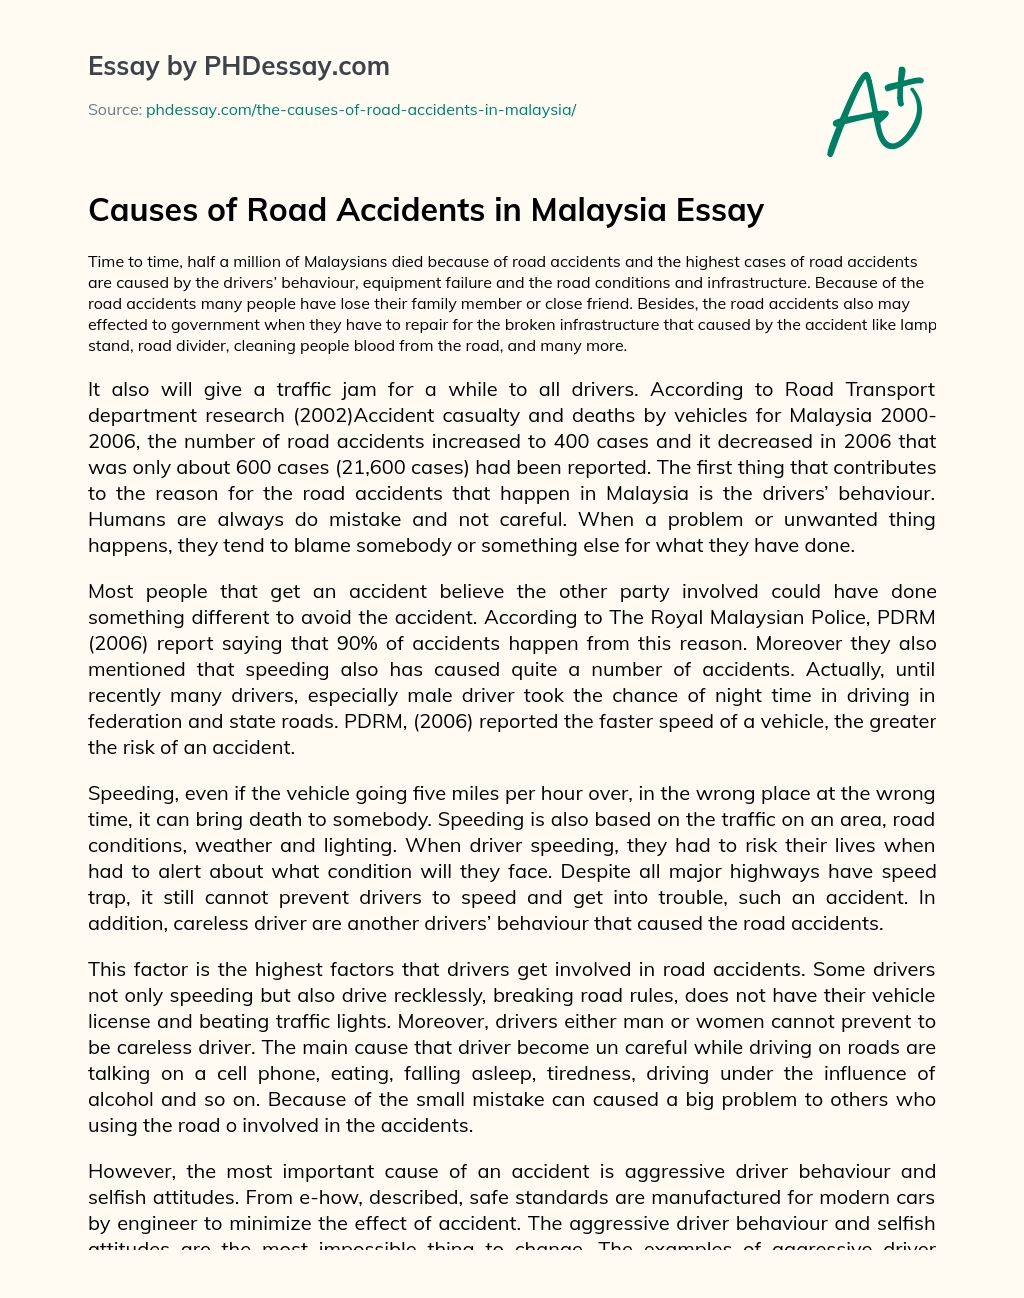 Causes of Road Accidents in Malaysia Essay essay